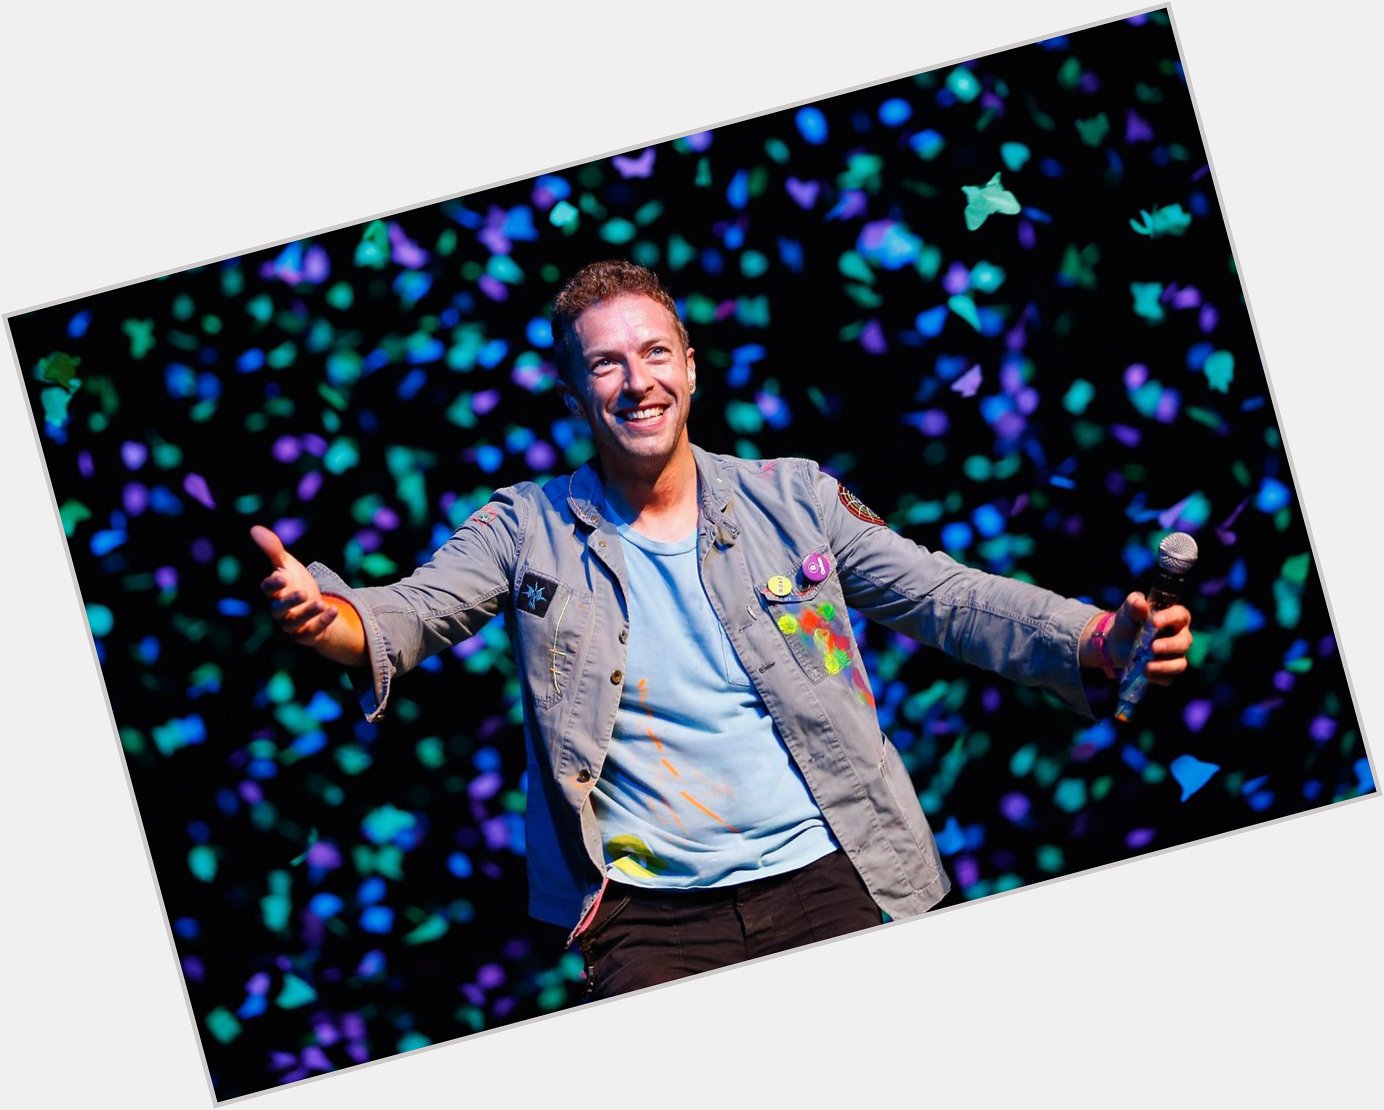 Such a talented singer with a beautiful voice happy birthday Chris martin     